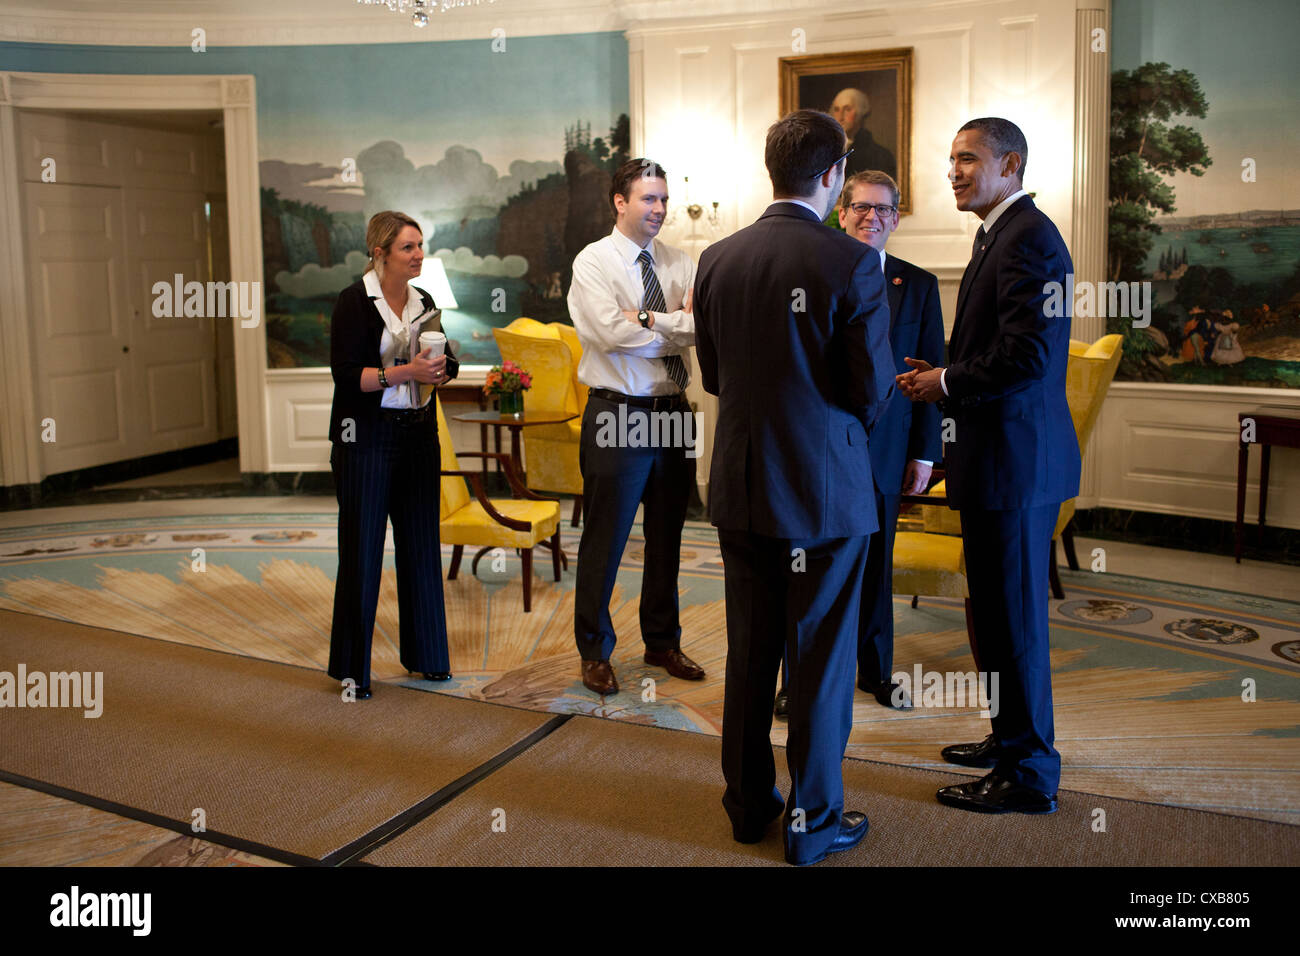 US President Barack Obama talks with staff October 14, 2011 in the Diplomatic Reception Room of the White House as he waits for the arrival of Marine One. Talking with the President, from left, are: Amy Brundage, Assistant Press Secretary; Josh Earnest, Principal Deputy Press Secretary; Brian Deese, National Economic Council Deputy Director; and Press Secretary Jay Carney. Stock Photo